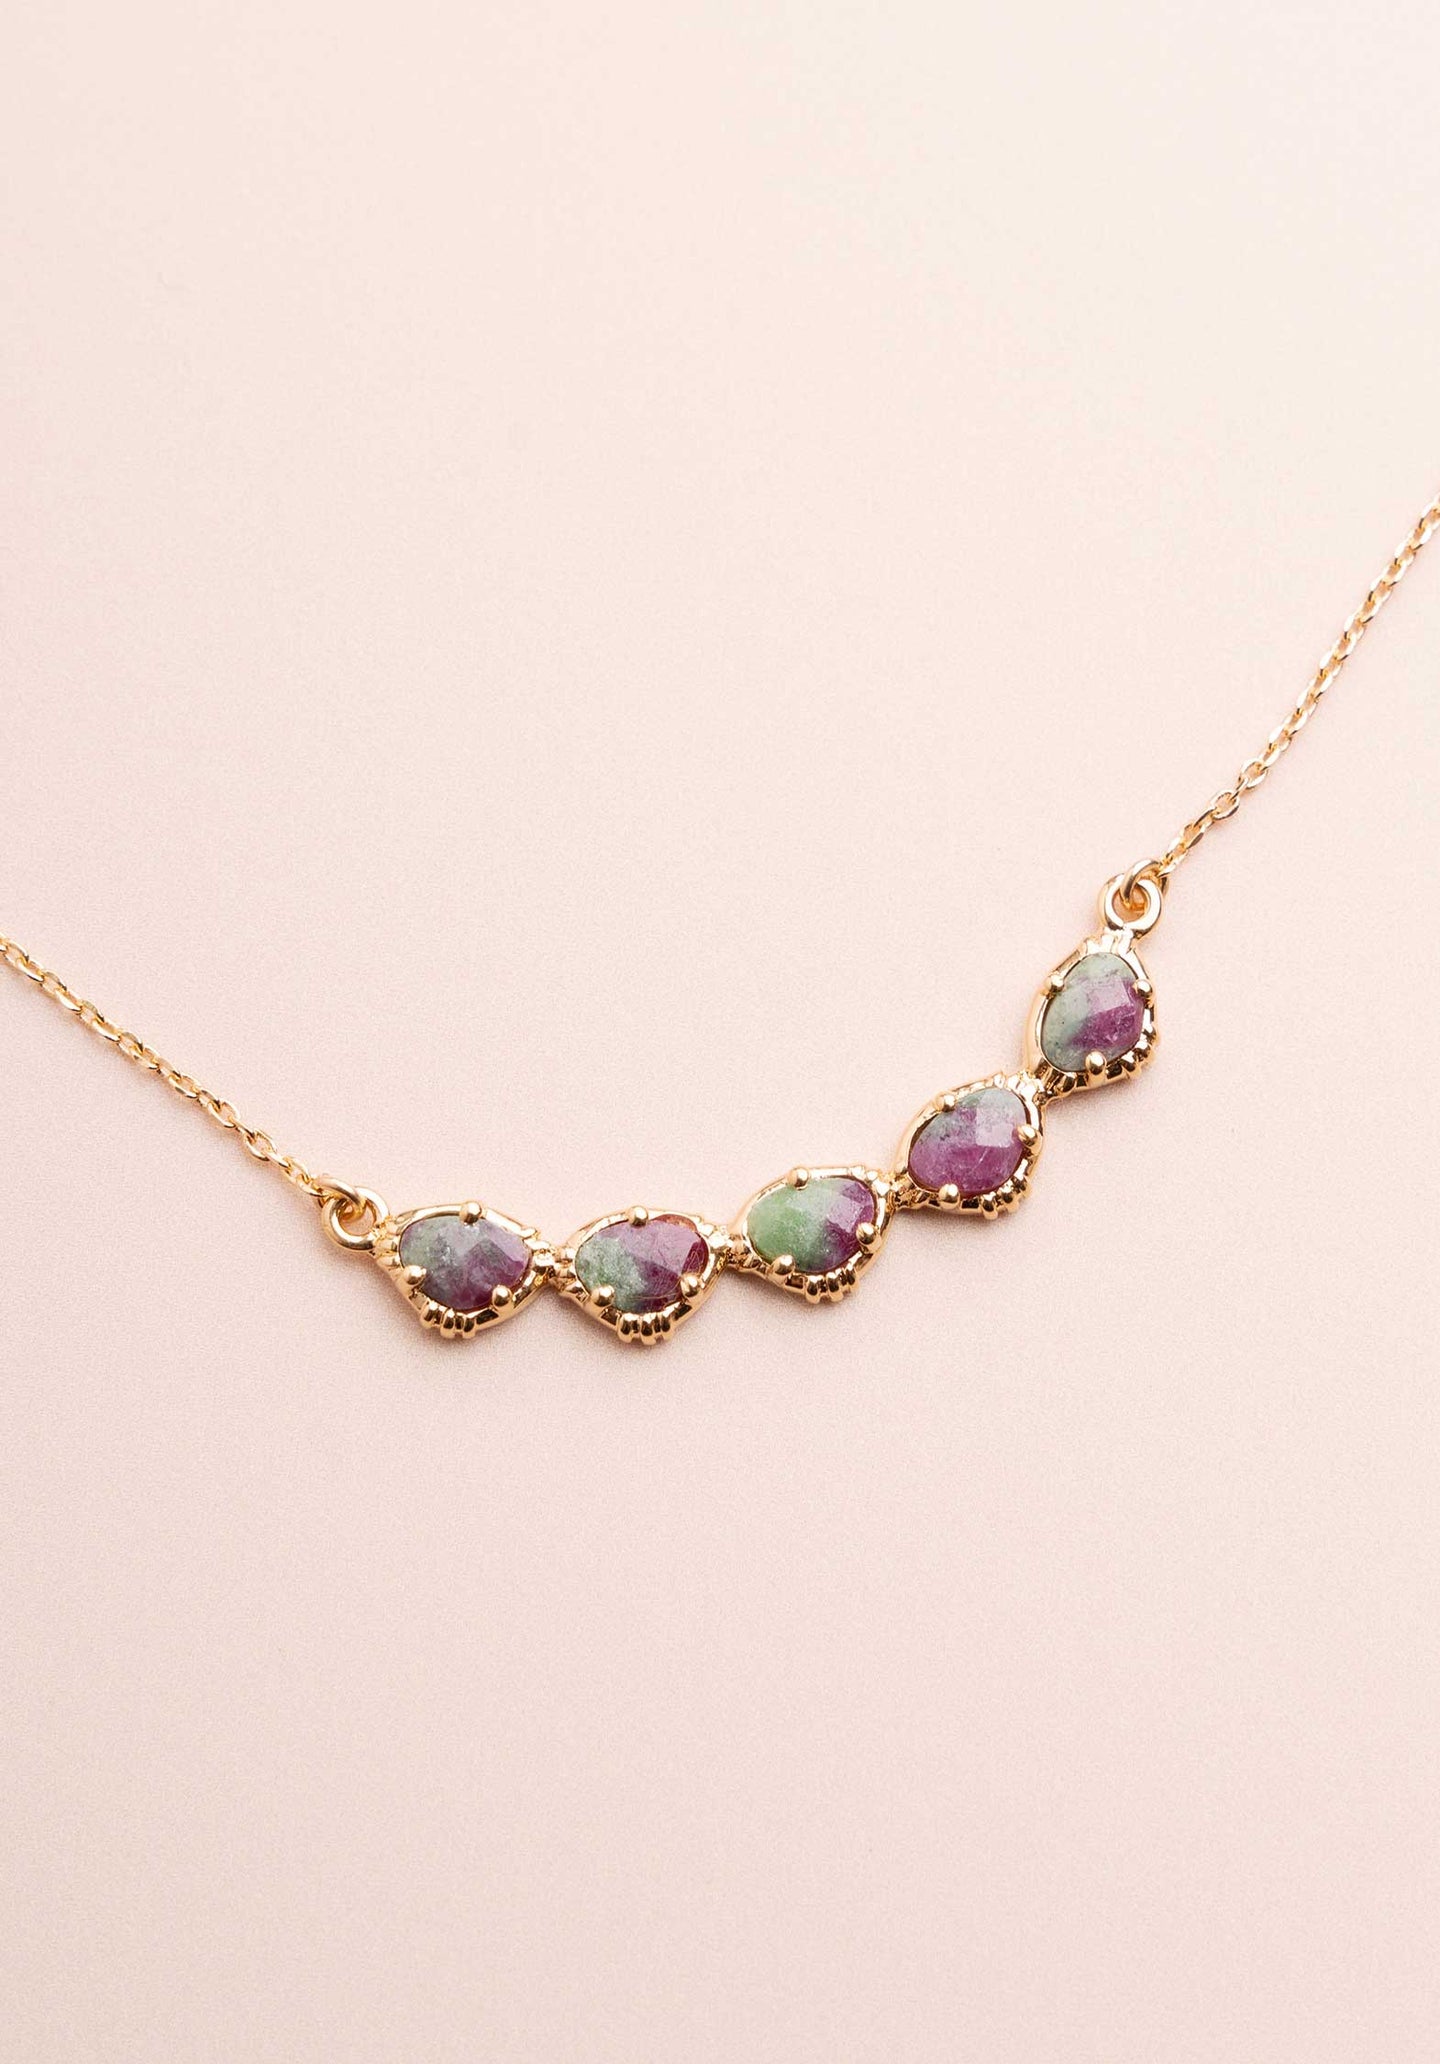 Necklace Rc587 Ruby-Zoisite